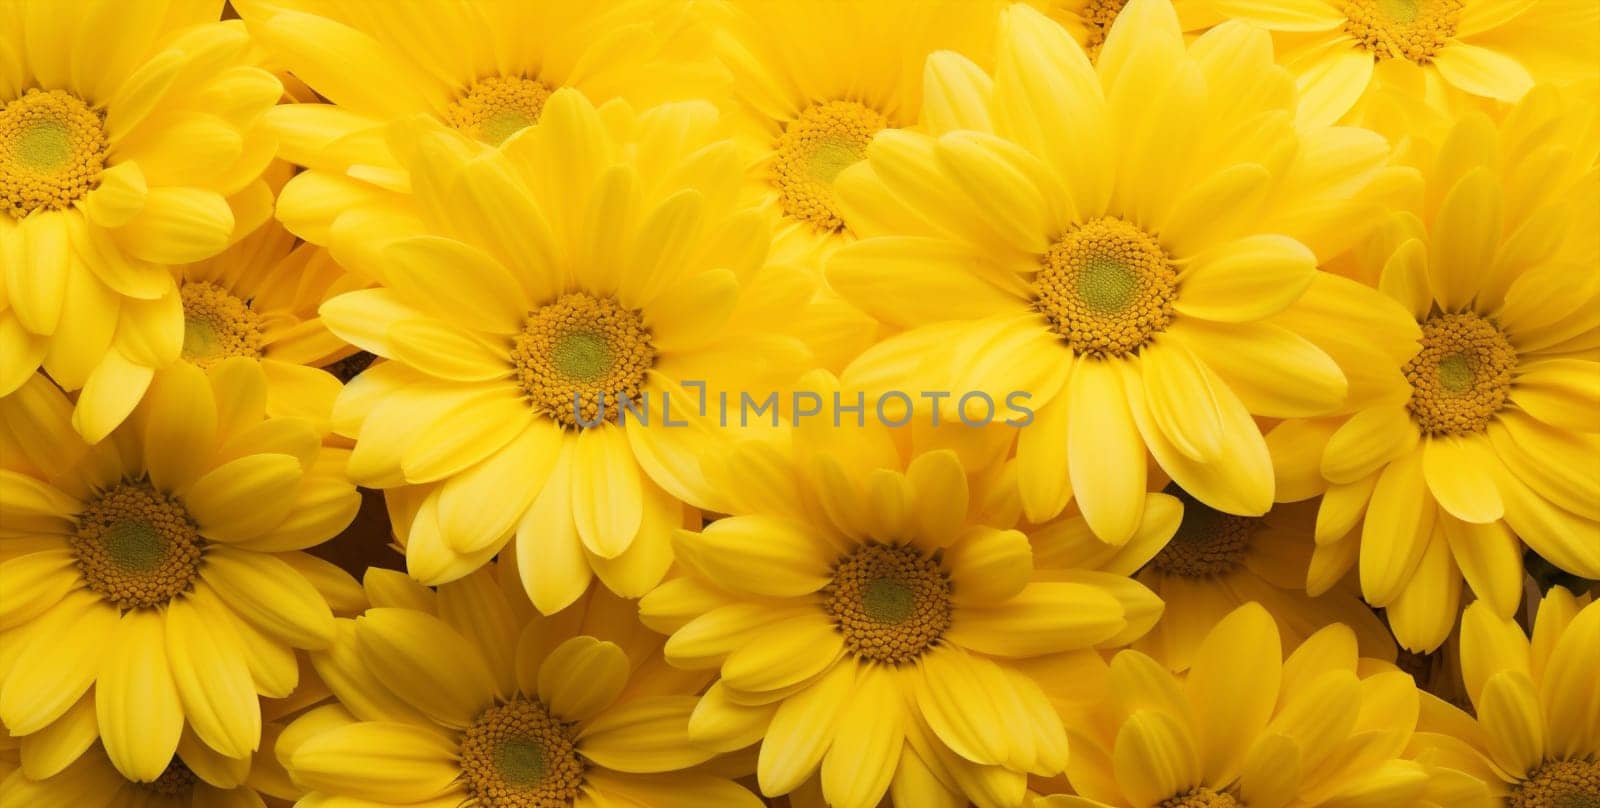 Blossom plants flora nature daisy gardening up bouquet bloom beauty close flower yellow group colorful bright chrysanthemum green botany summer mockup background floral petal